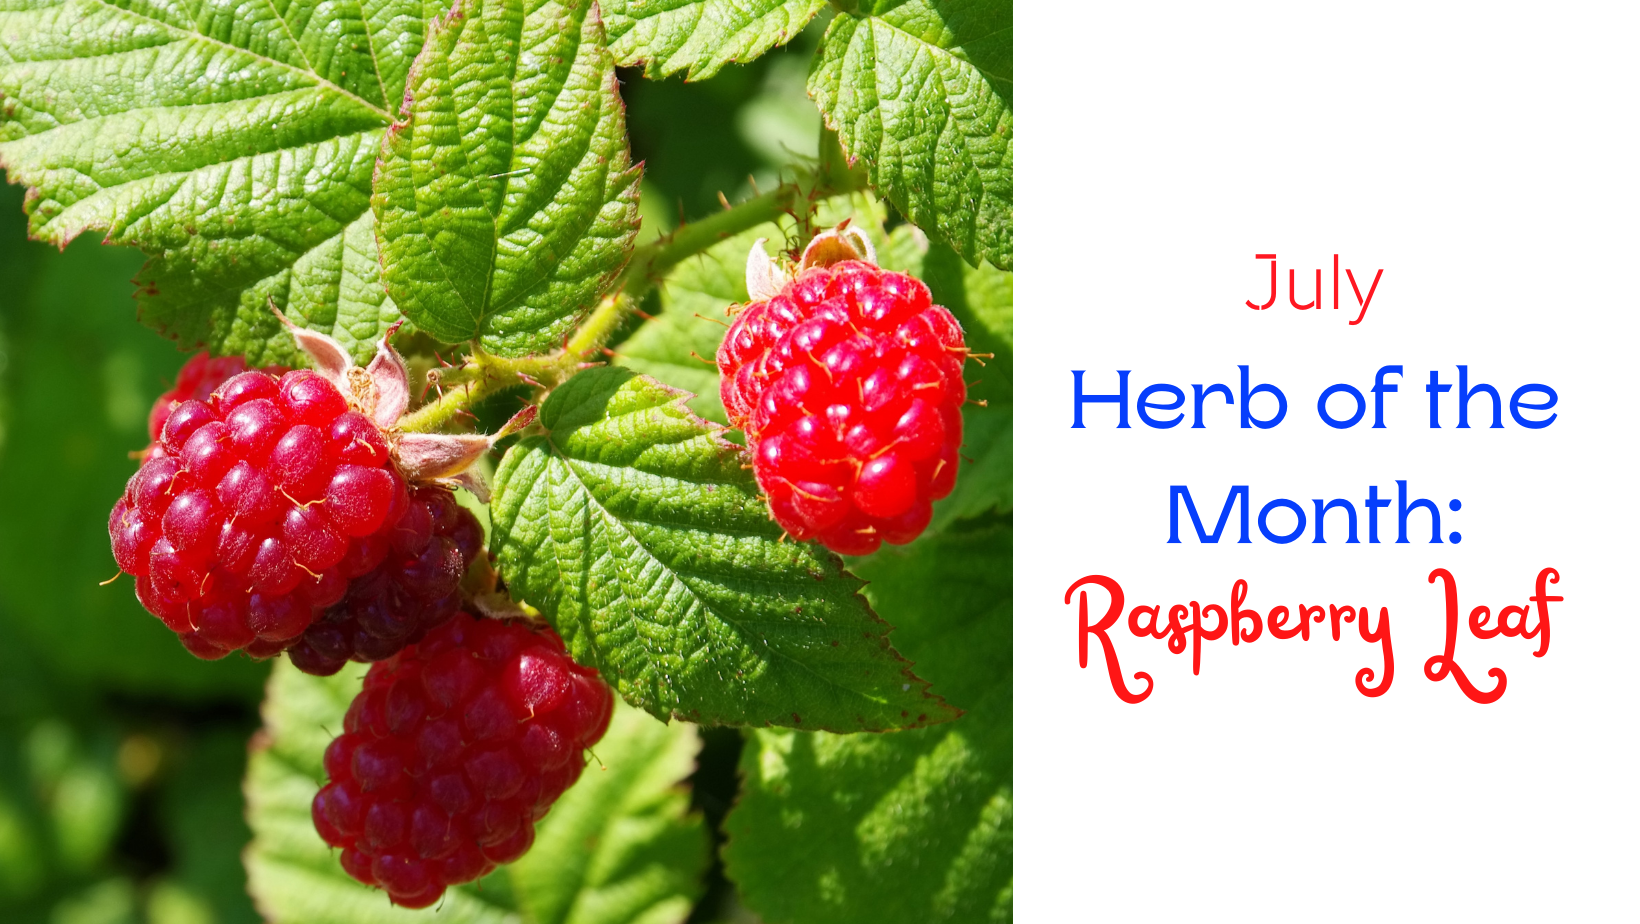 July Herb of the Month: Raspberry Leaf